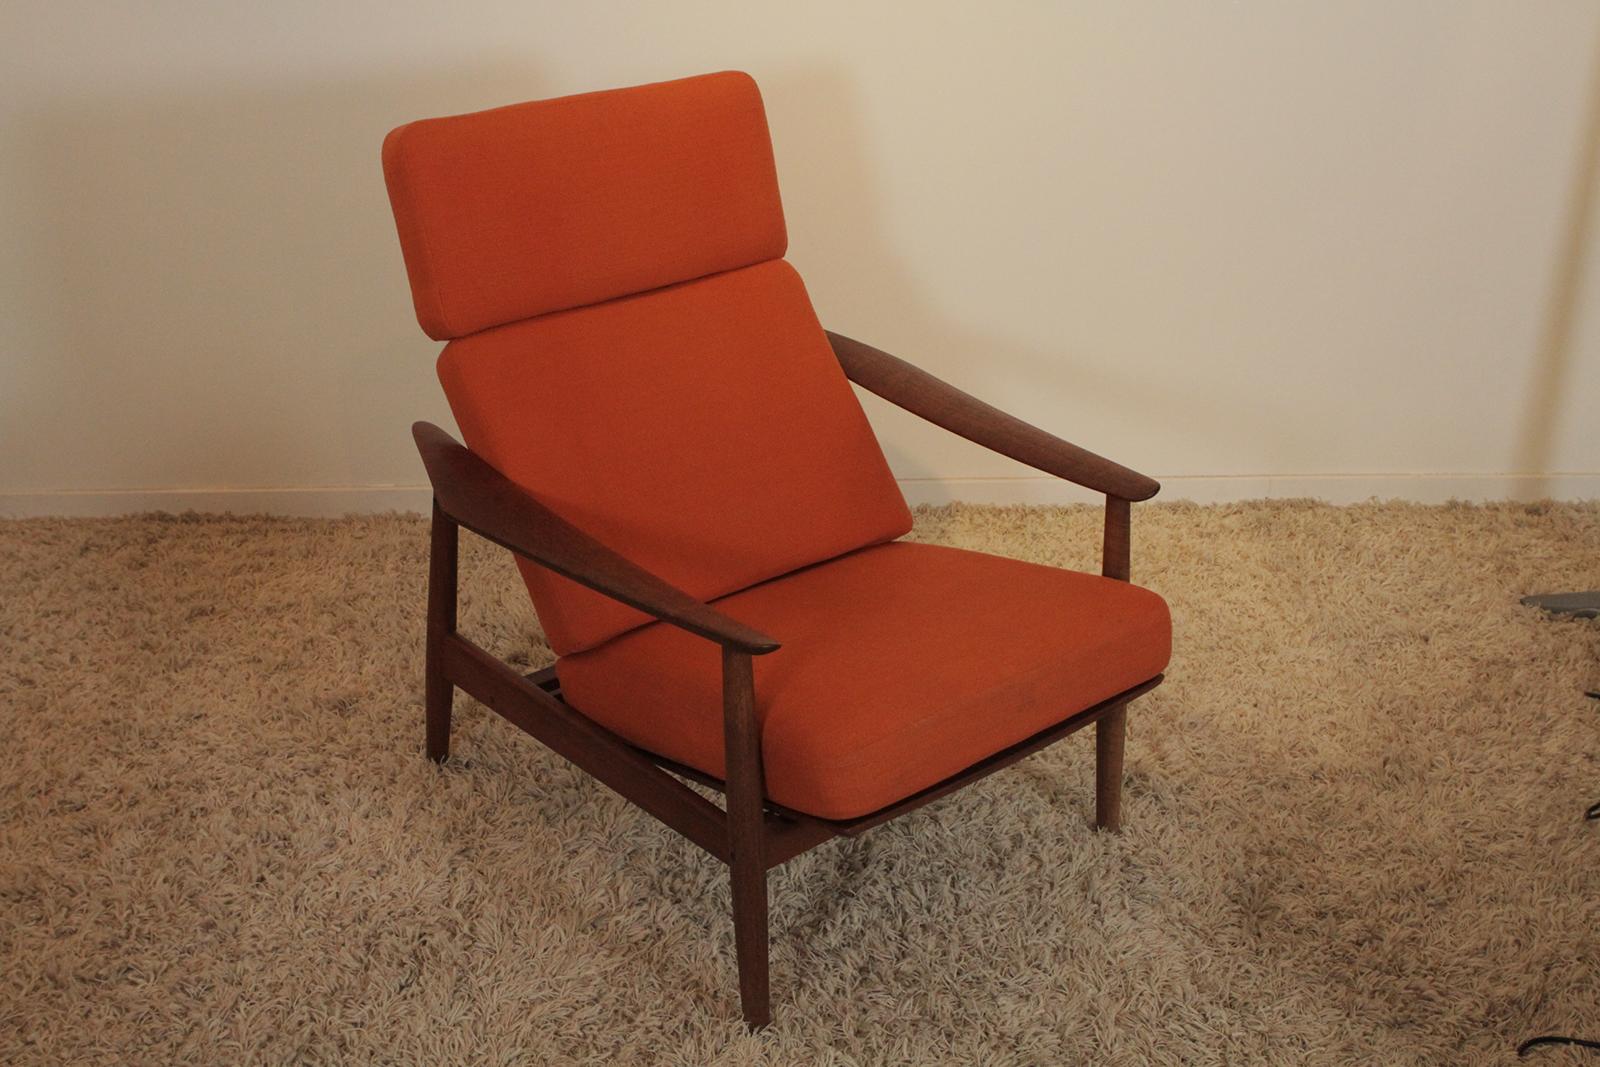 Midcentury Arne Vodder for France & Sons recliner with original fabric # FD-164
Dimensions: 31